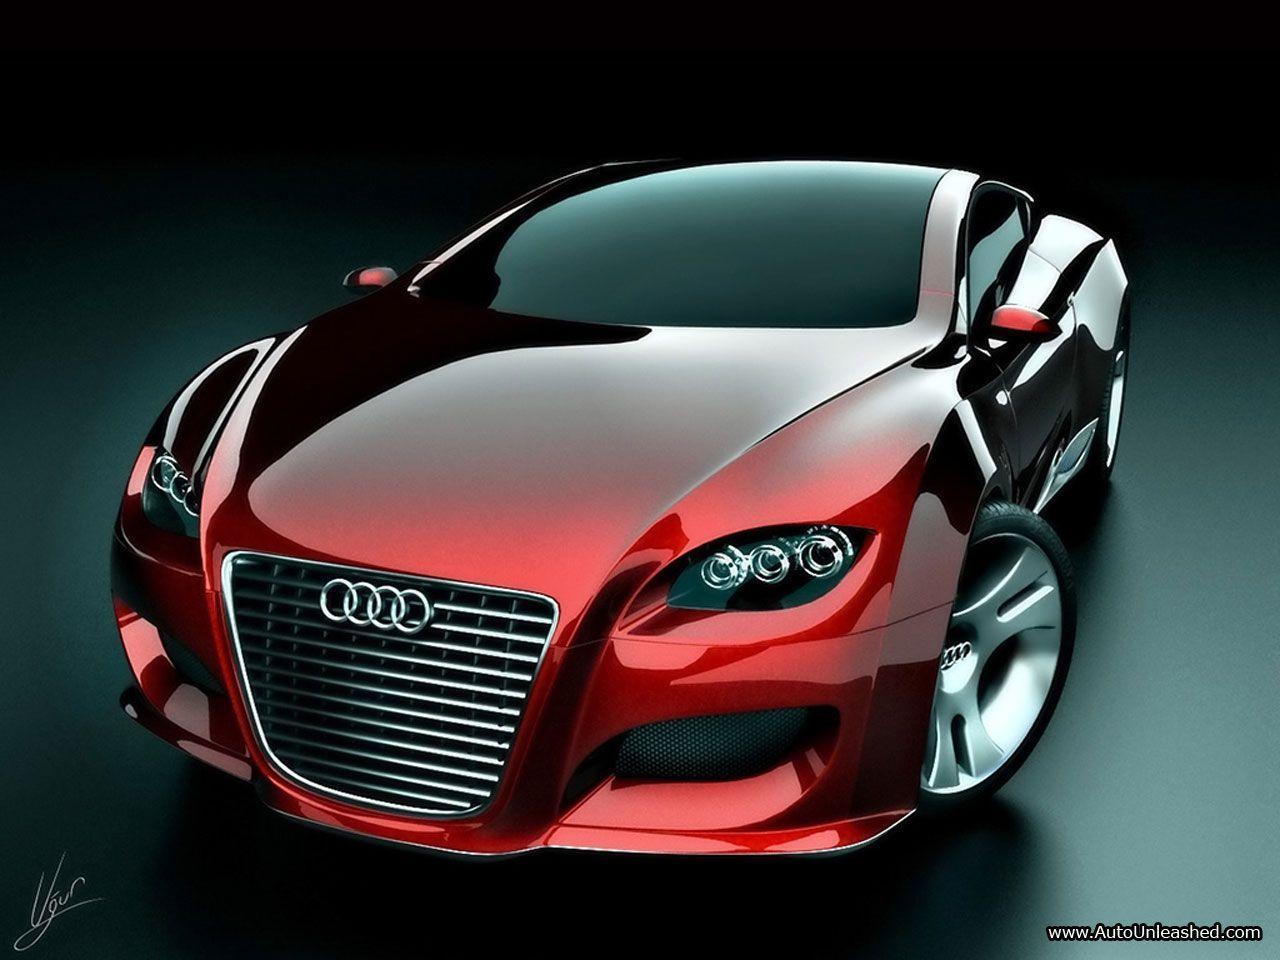 concept car wallpaper. Cars Wallpaper And Picture car image